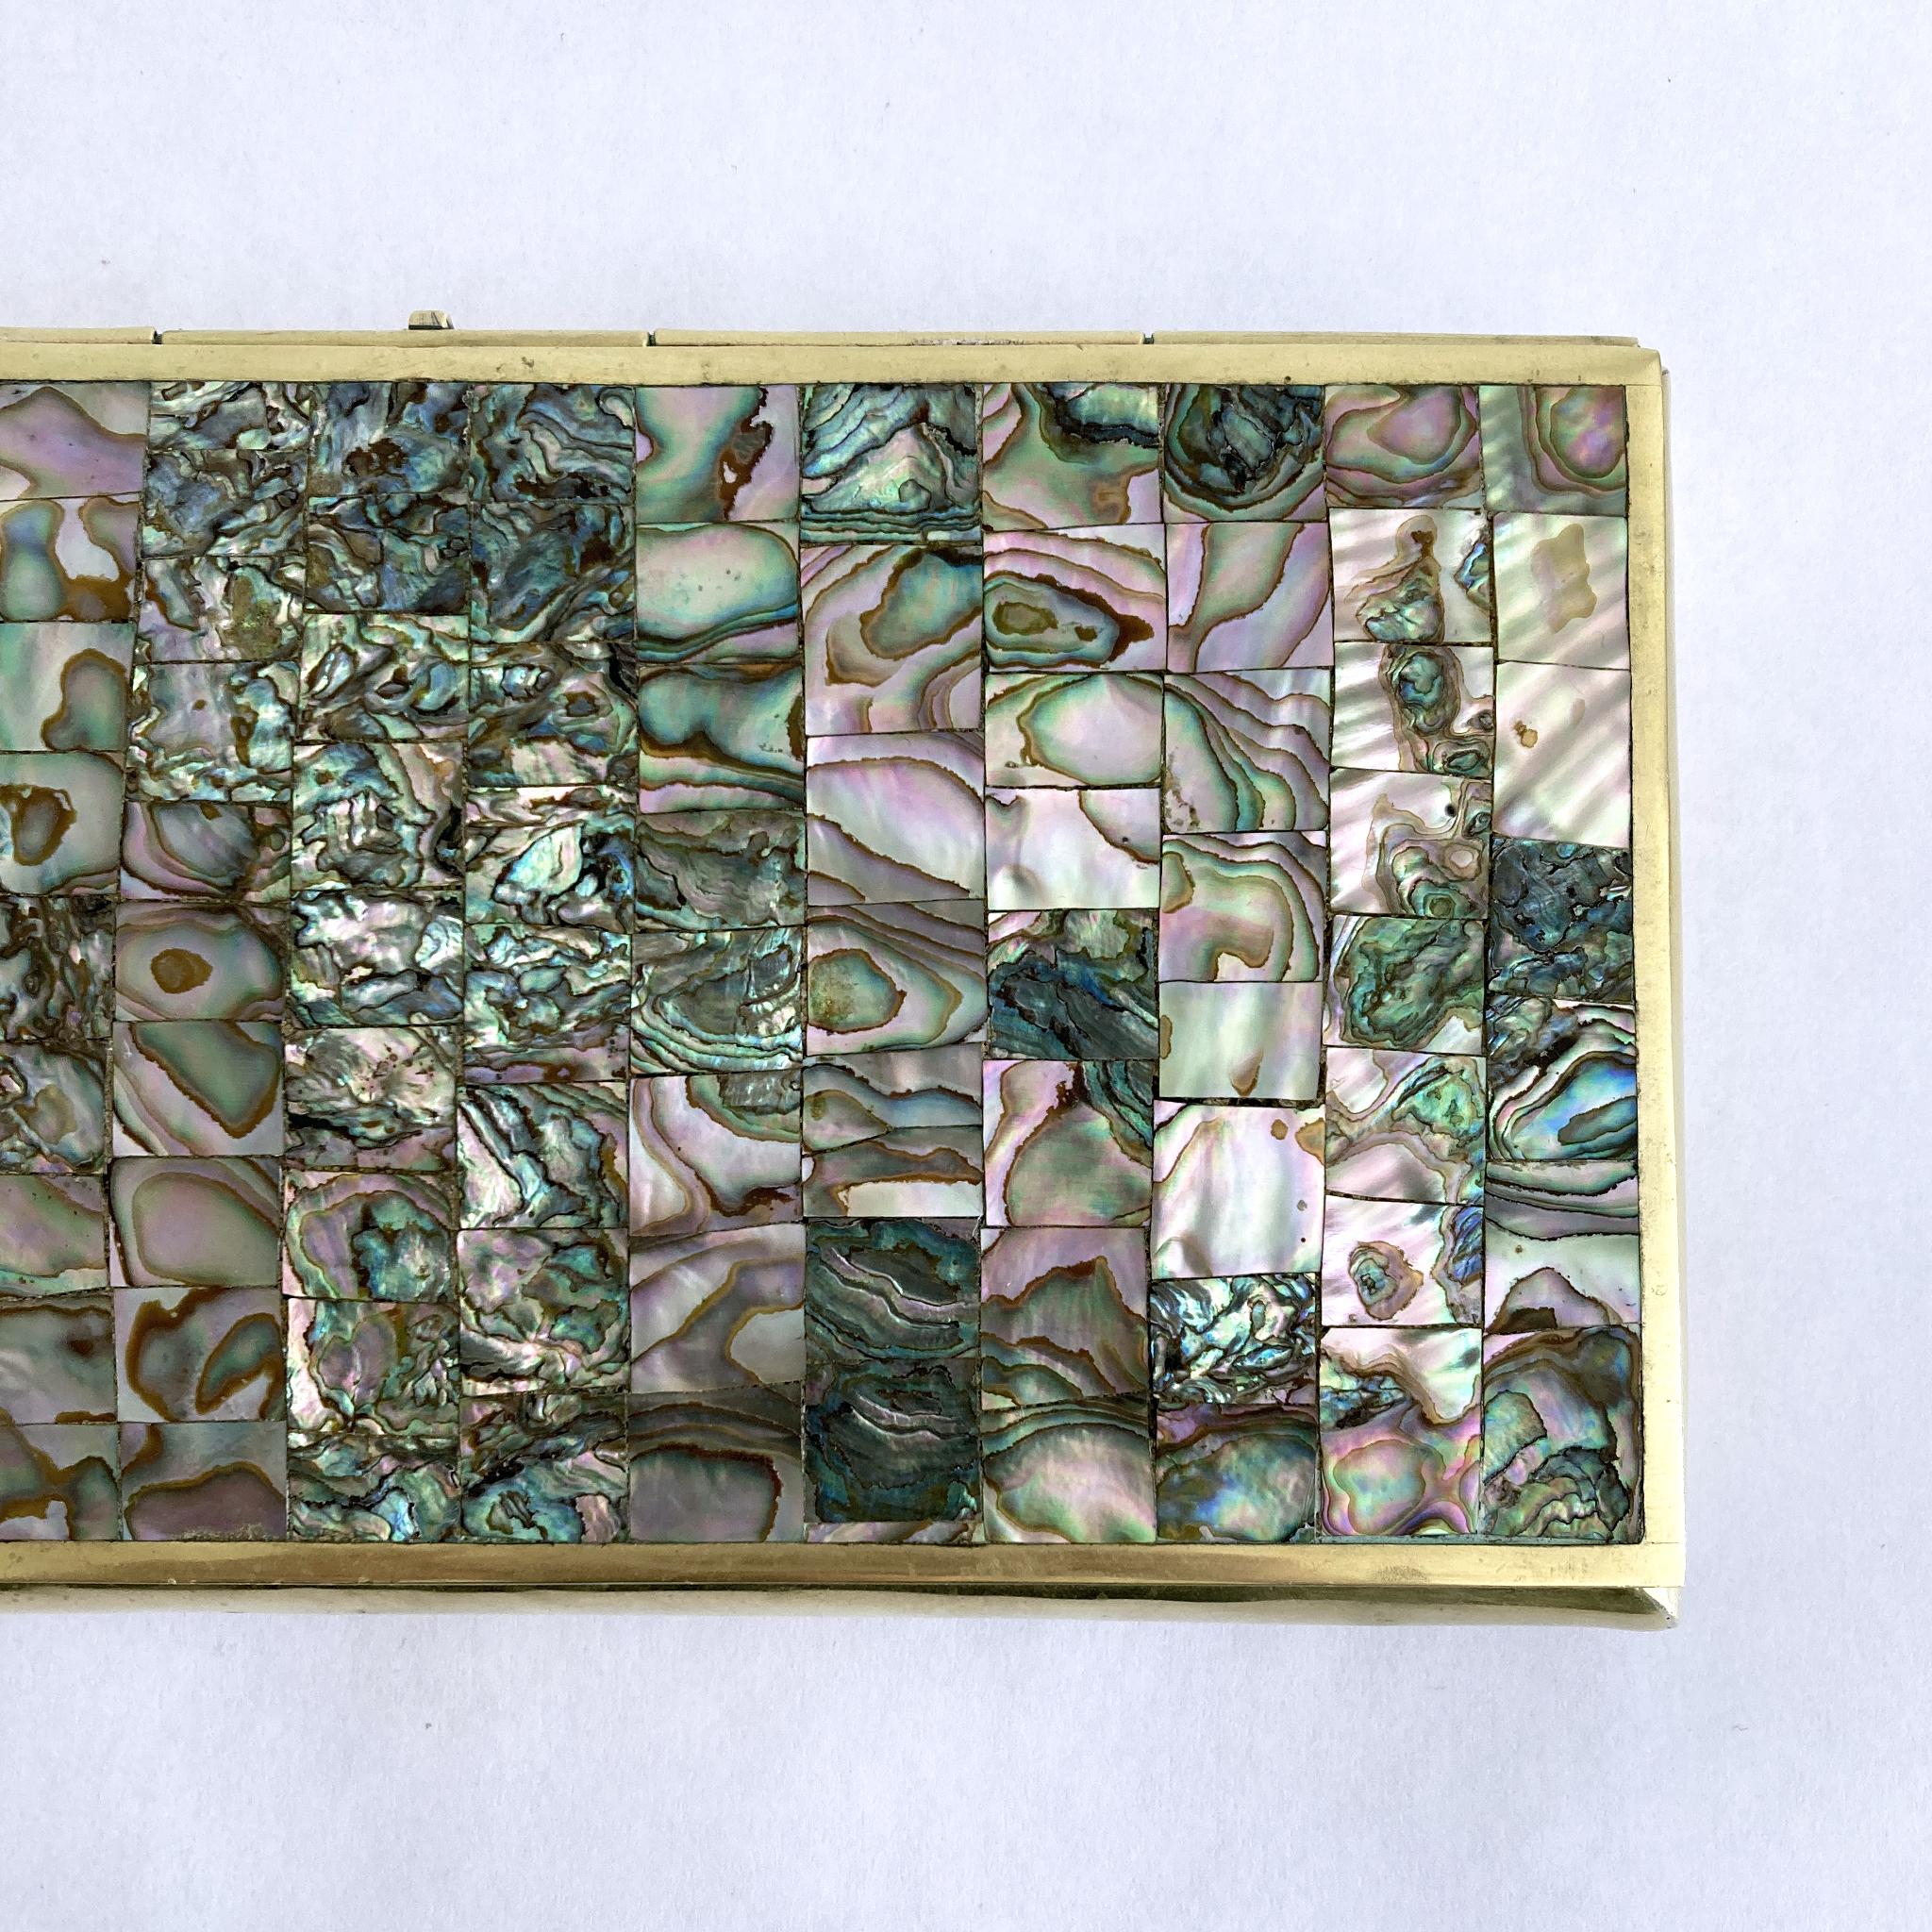 Midcentury Hinged Abalone Shell and Brass Box, Mosaic Pattern on Lid, Wood-lined In Good Condition For Sale In New York, NY